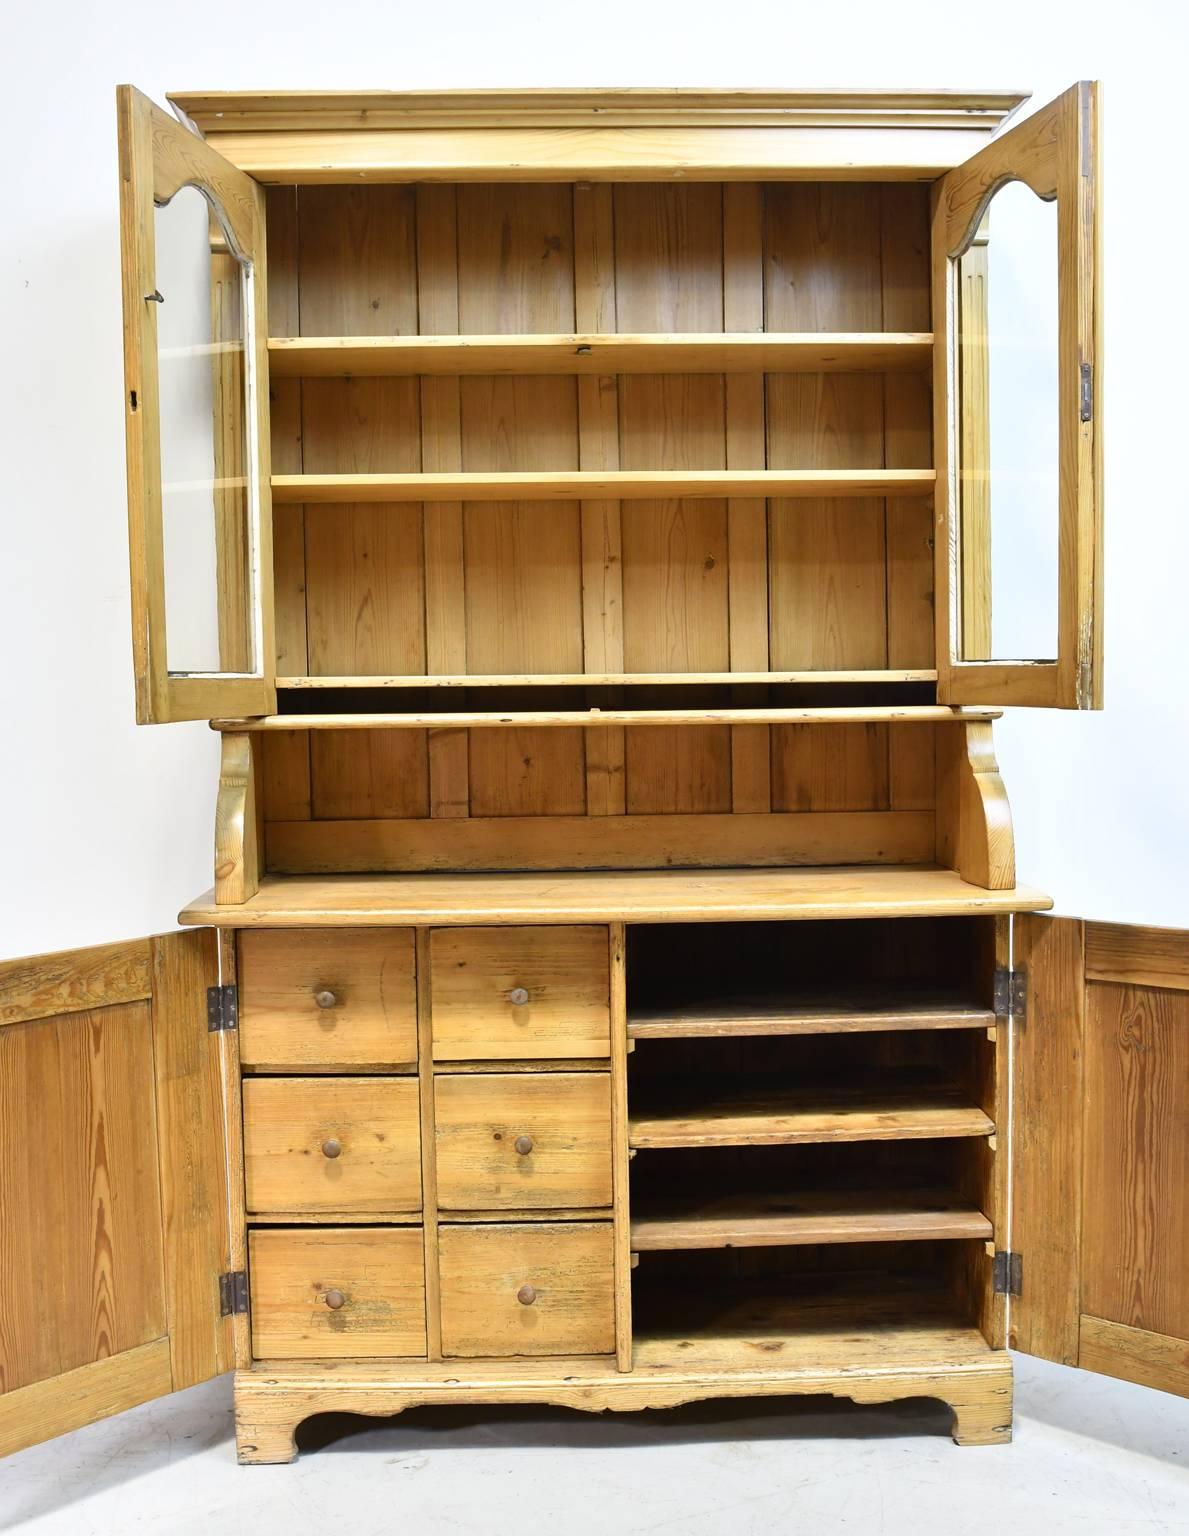 Exceptional North German honey pine hutch or buffet with original glass, a flight of 6 drawers in the bottom cabinet (left) and shelves on the right. All original including hardware with working locks and key. Perfect for your kitchen or informal